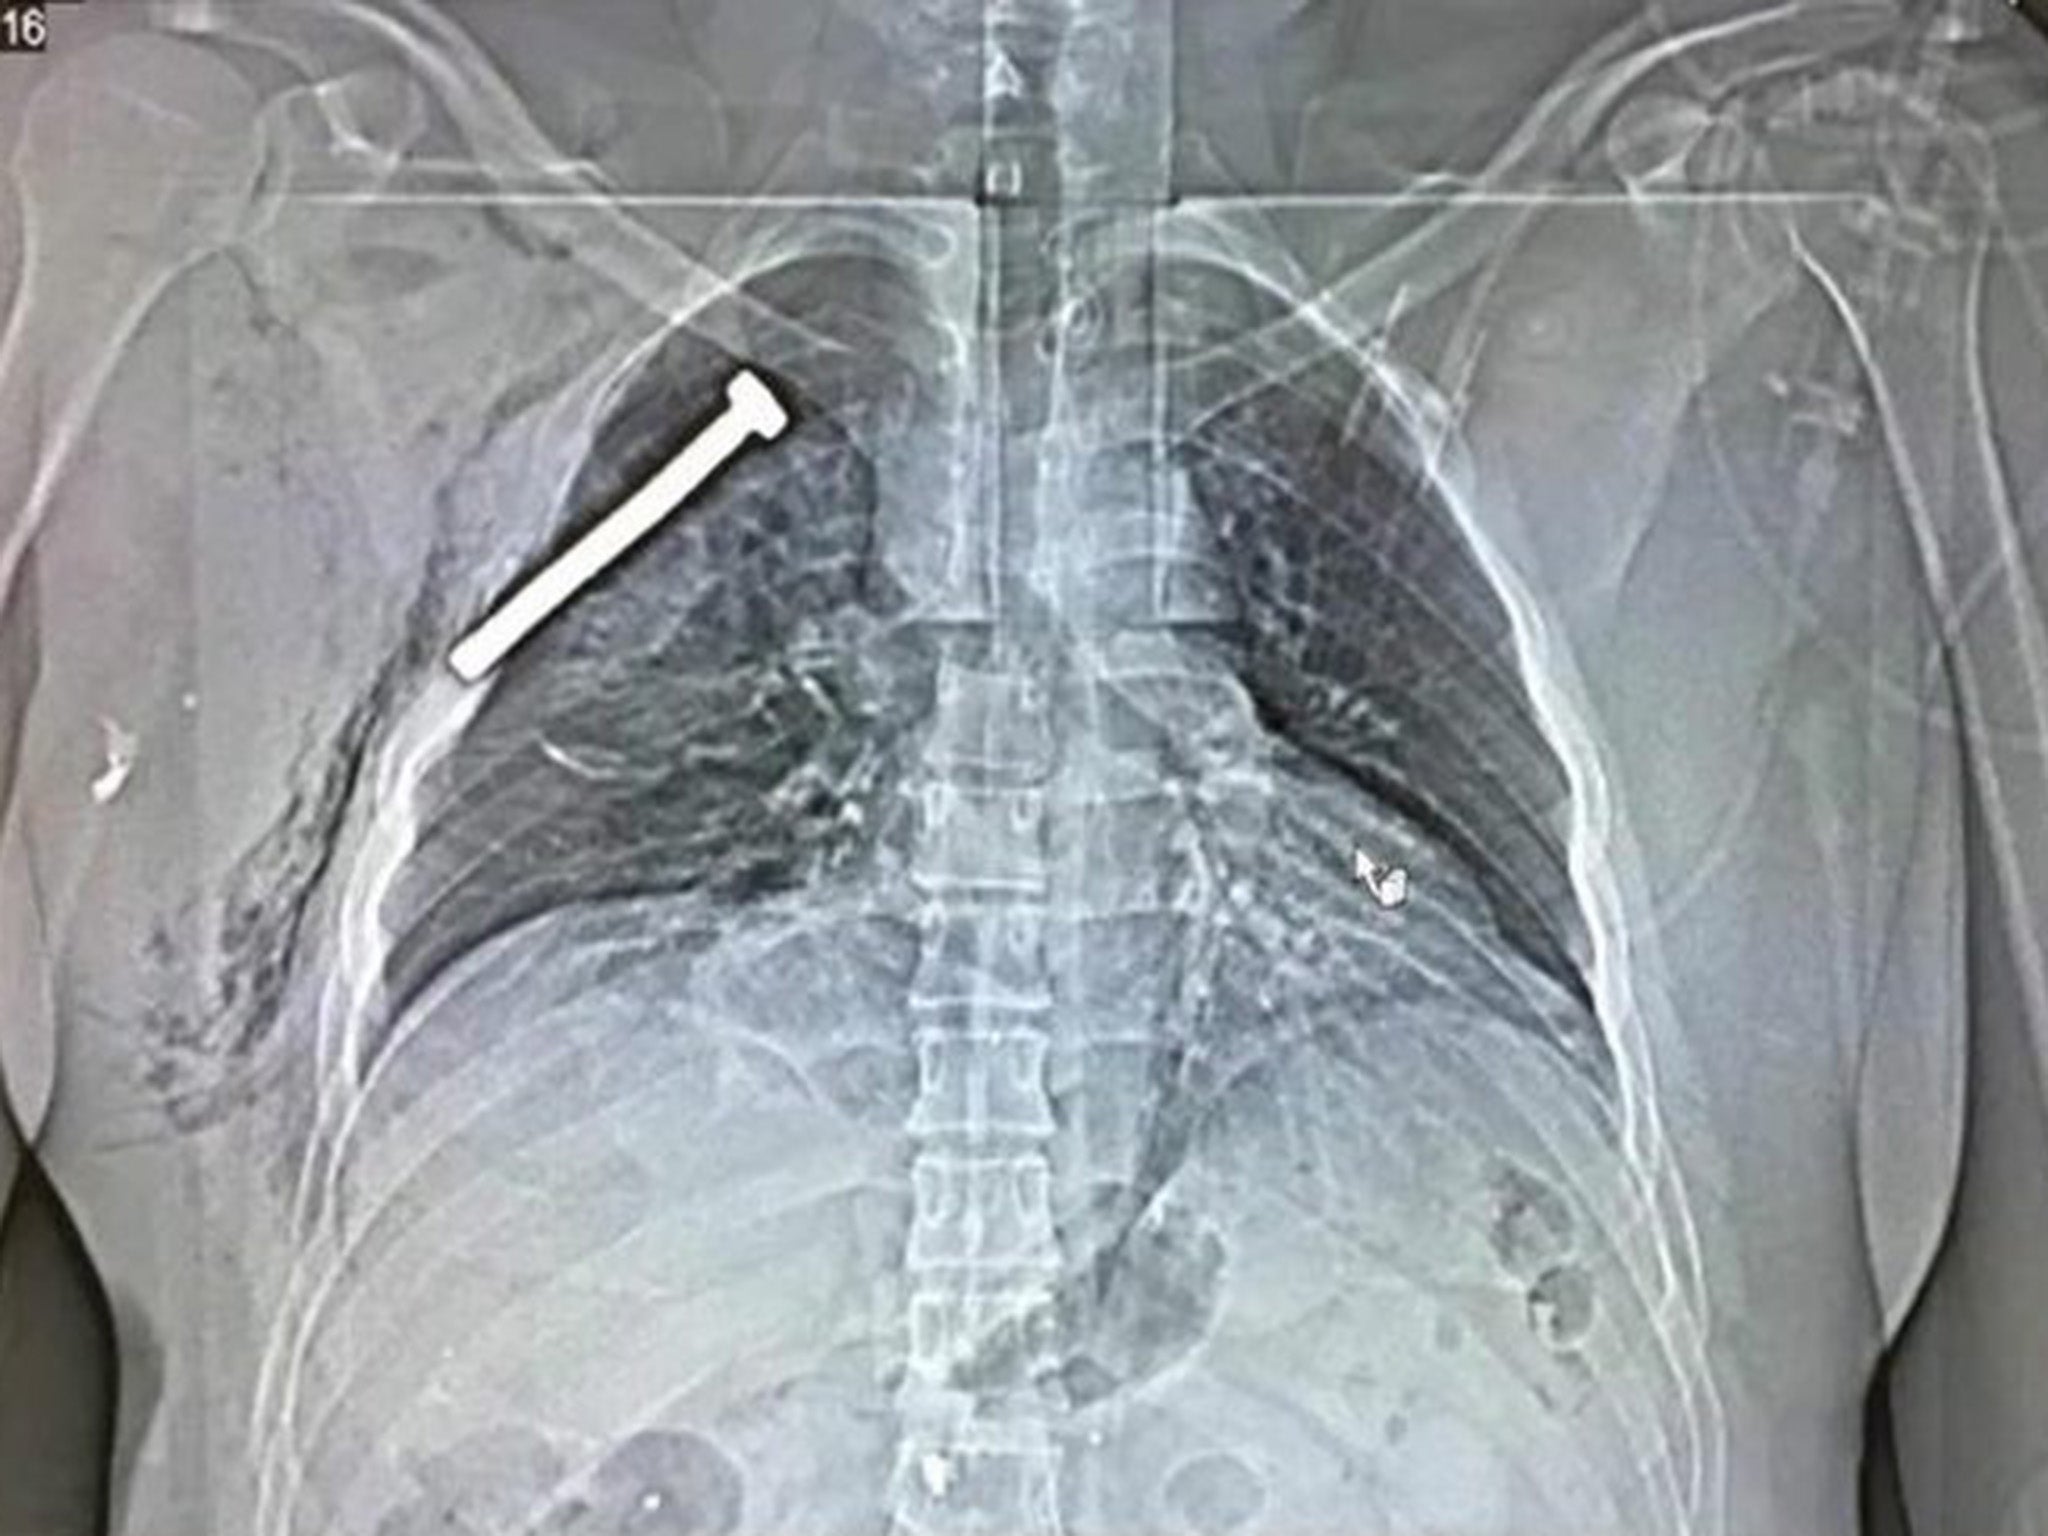 X-ray from victim of Brussels attacks shows a nail embedded in their chest